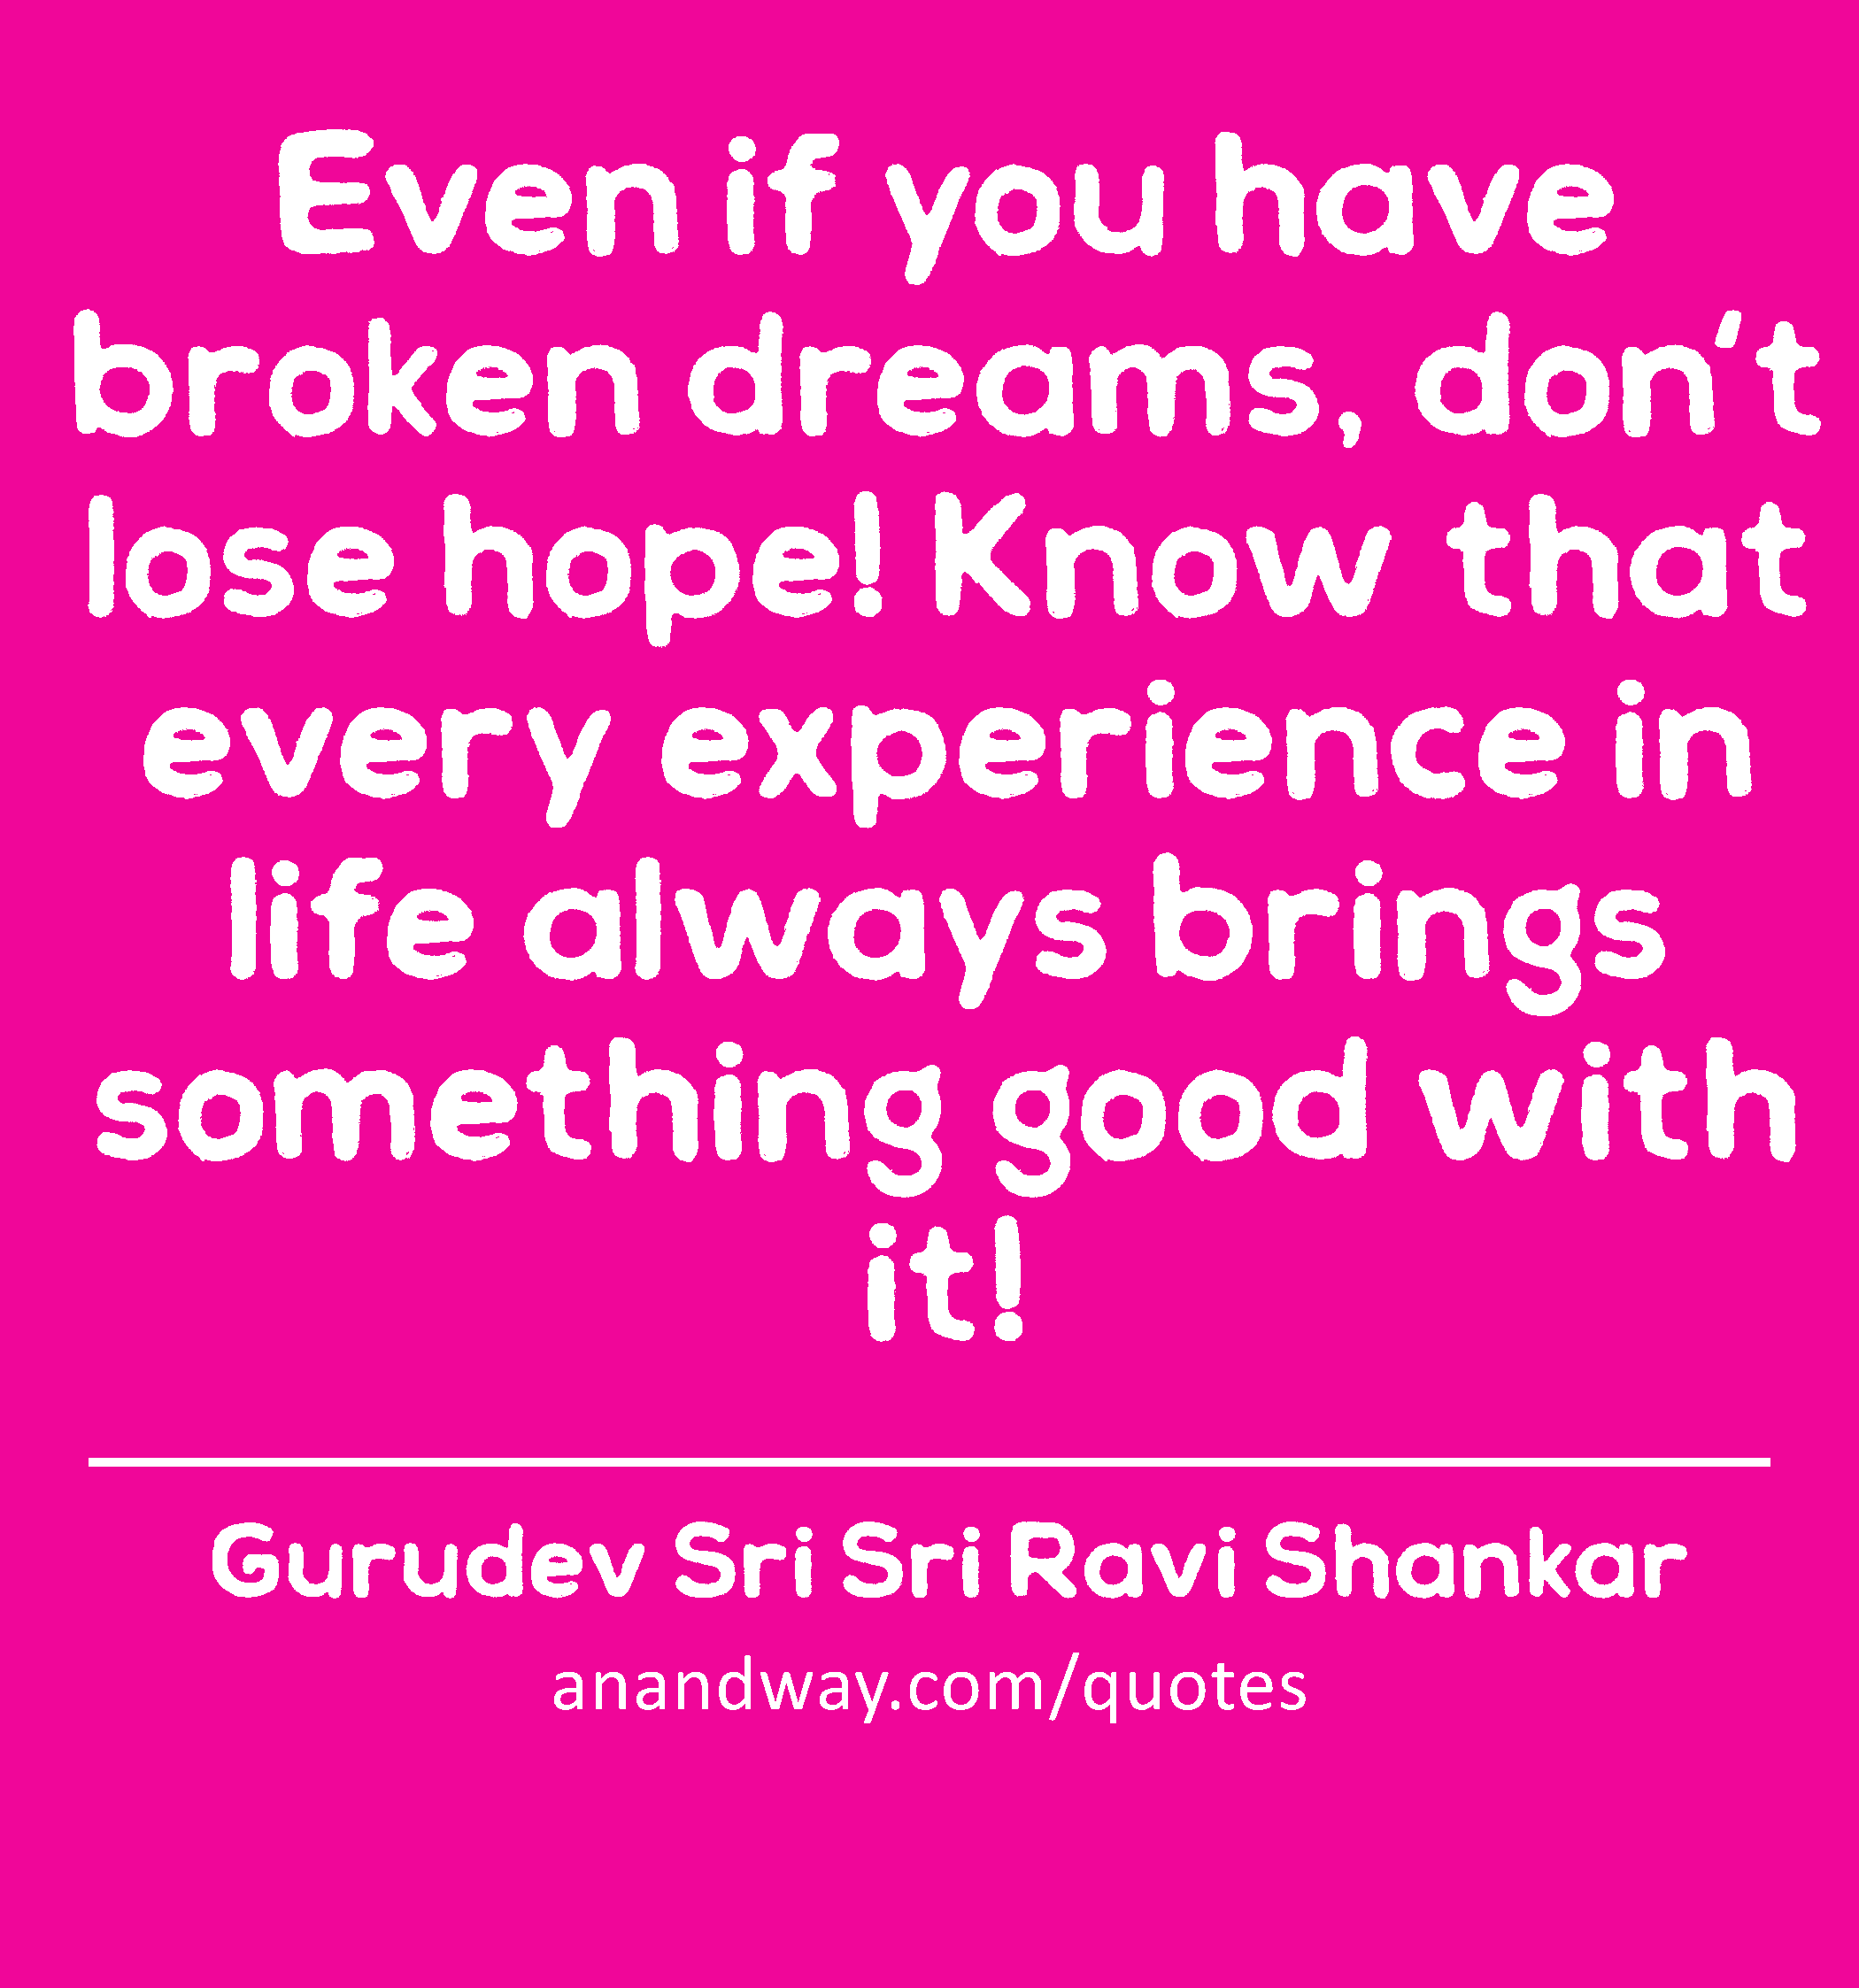 Even if you have broken dreams, don't lose hope! Know that every experience in life always brings
 -Gurudev Sri Sri Ravi Shankar